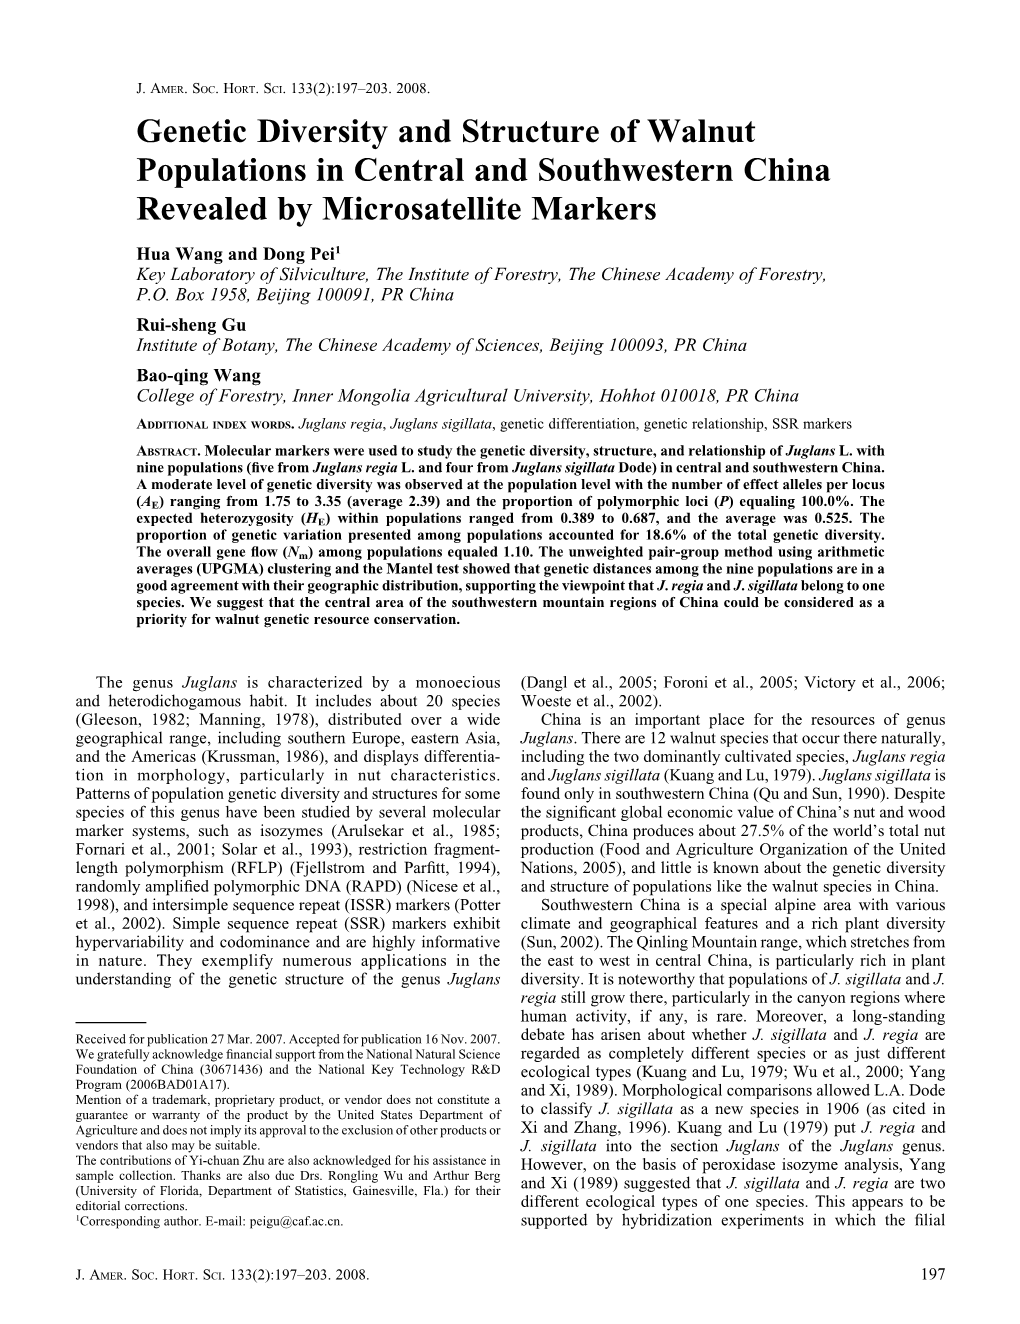 Genetic Diversity and Structure of Walnut Populations in Central and Southwestern China Revealed by Microsatellite Markers